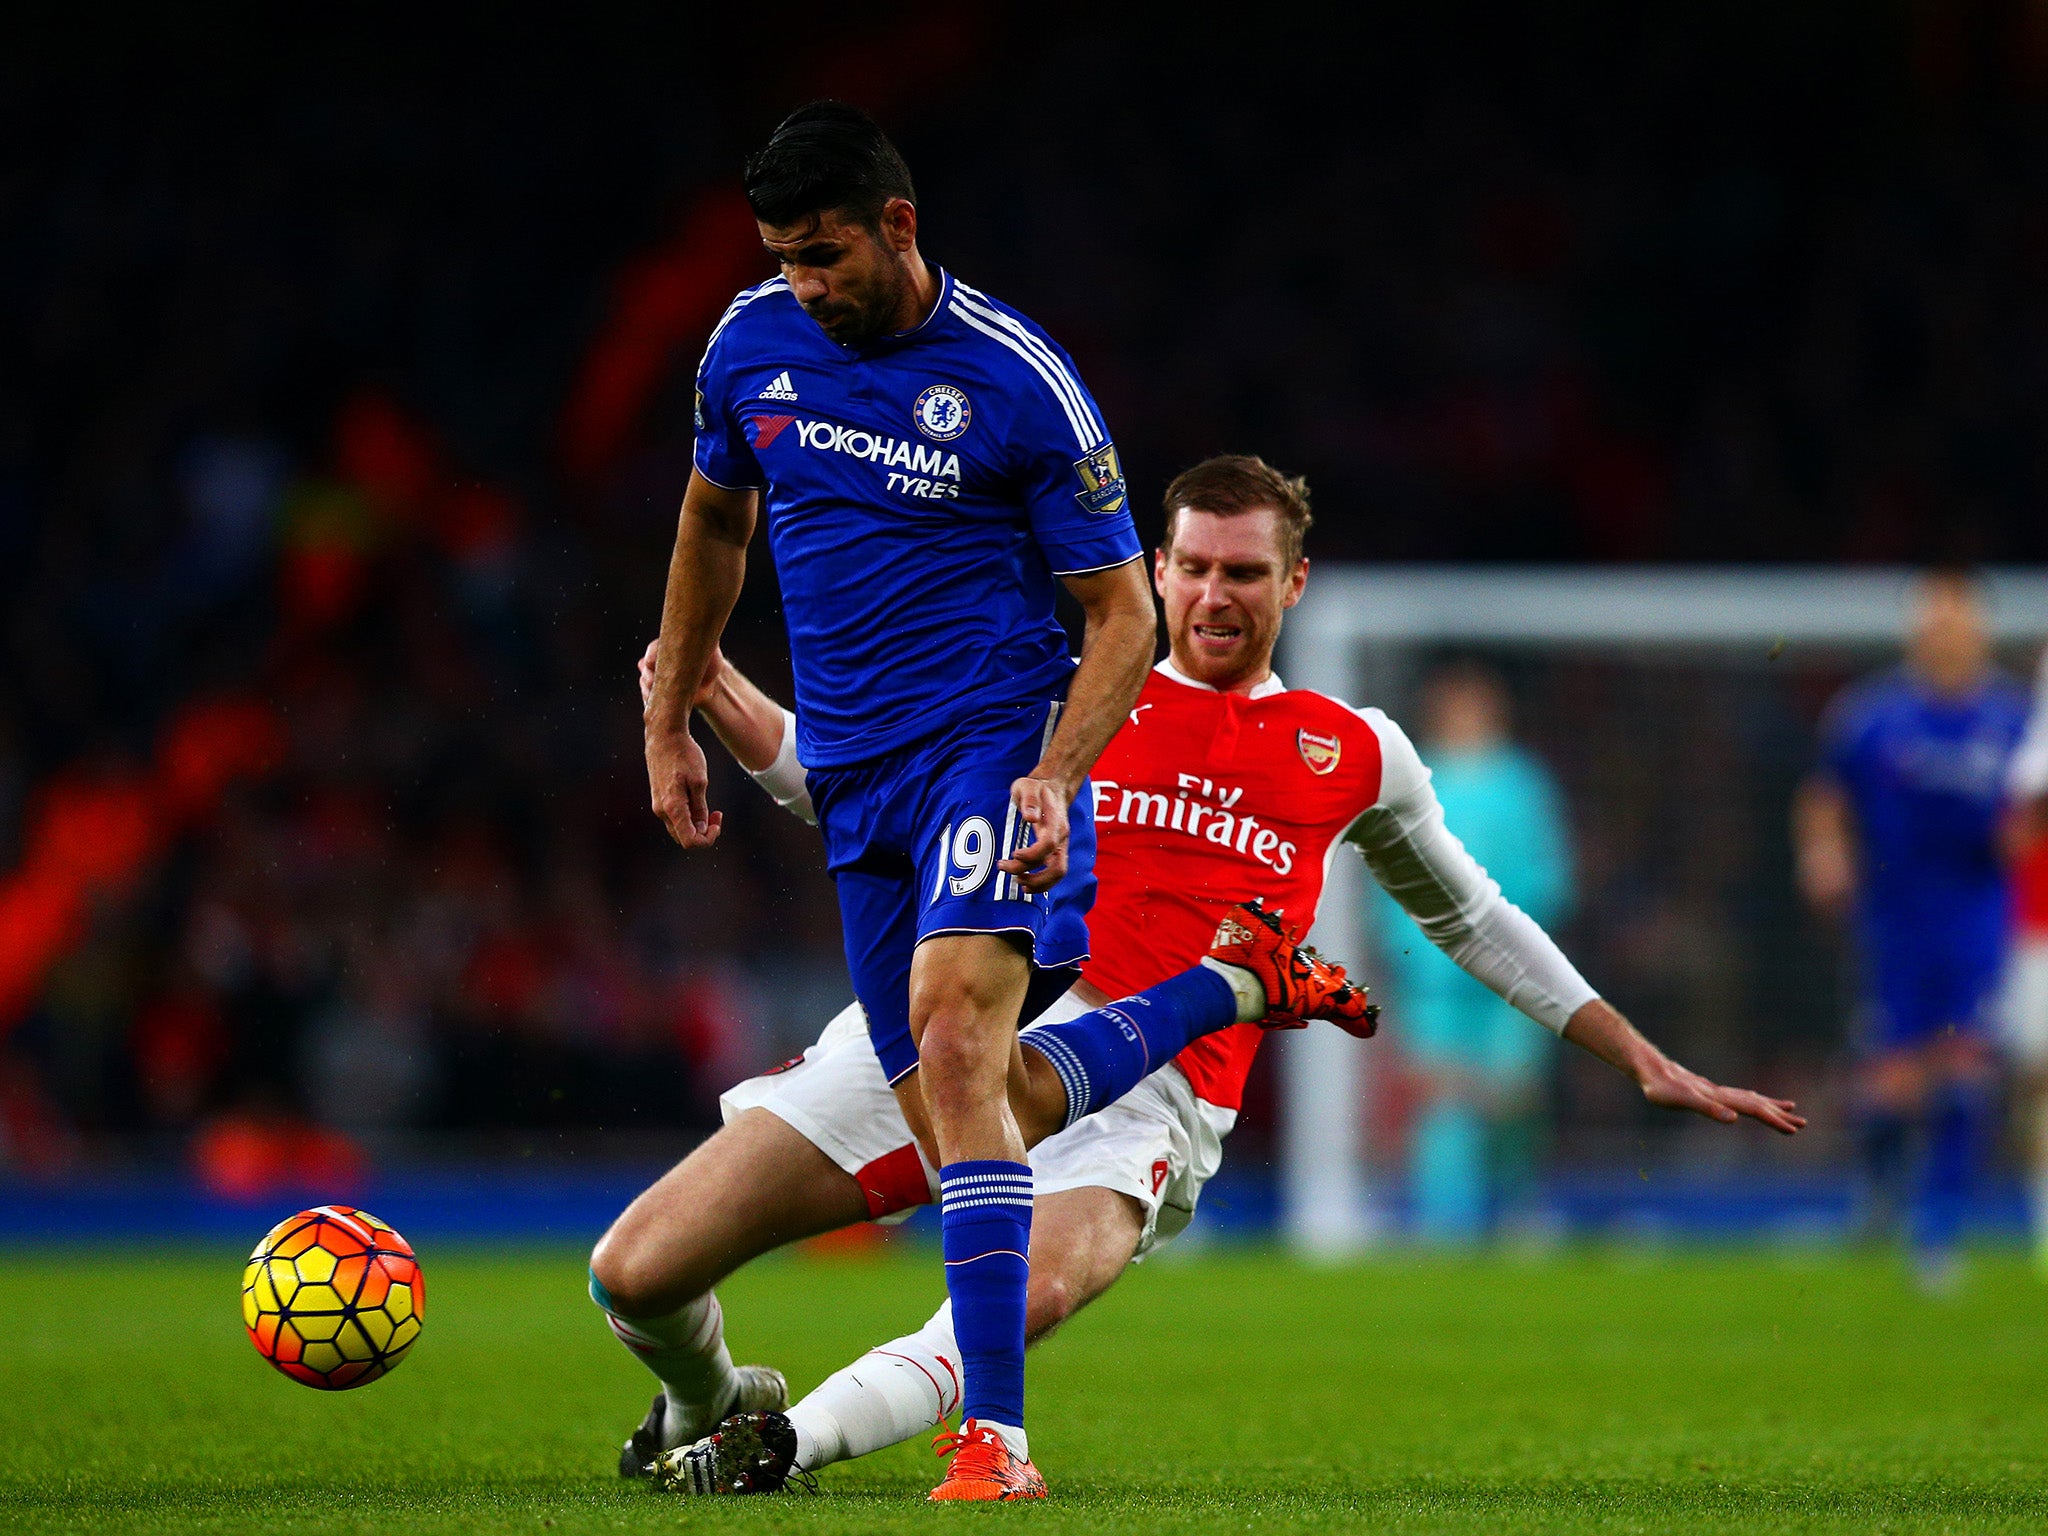 Per Mertesacker saw red for this challenge on Diego Costa